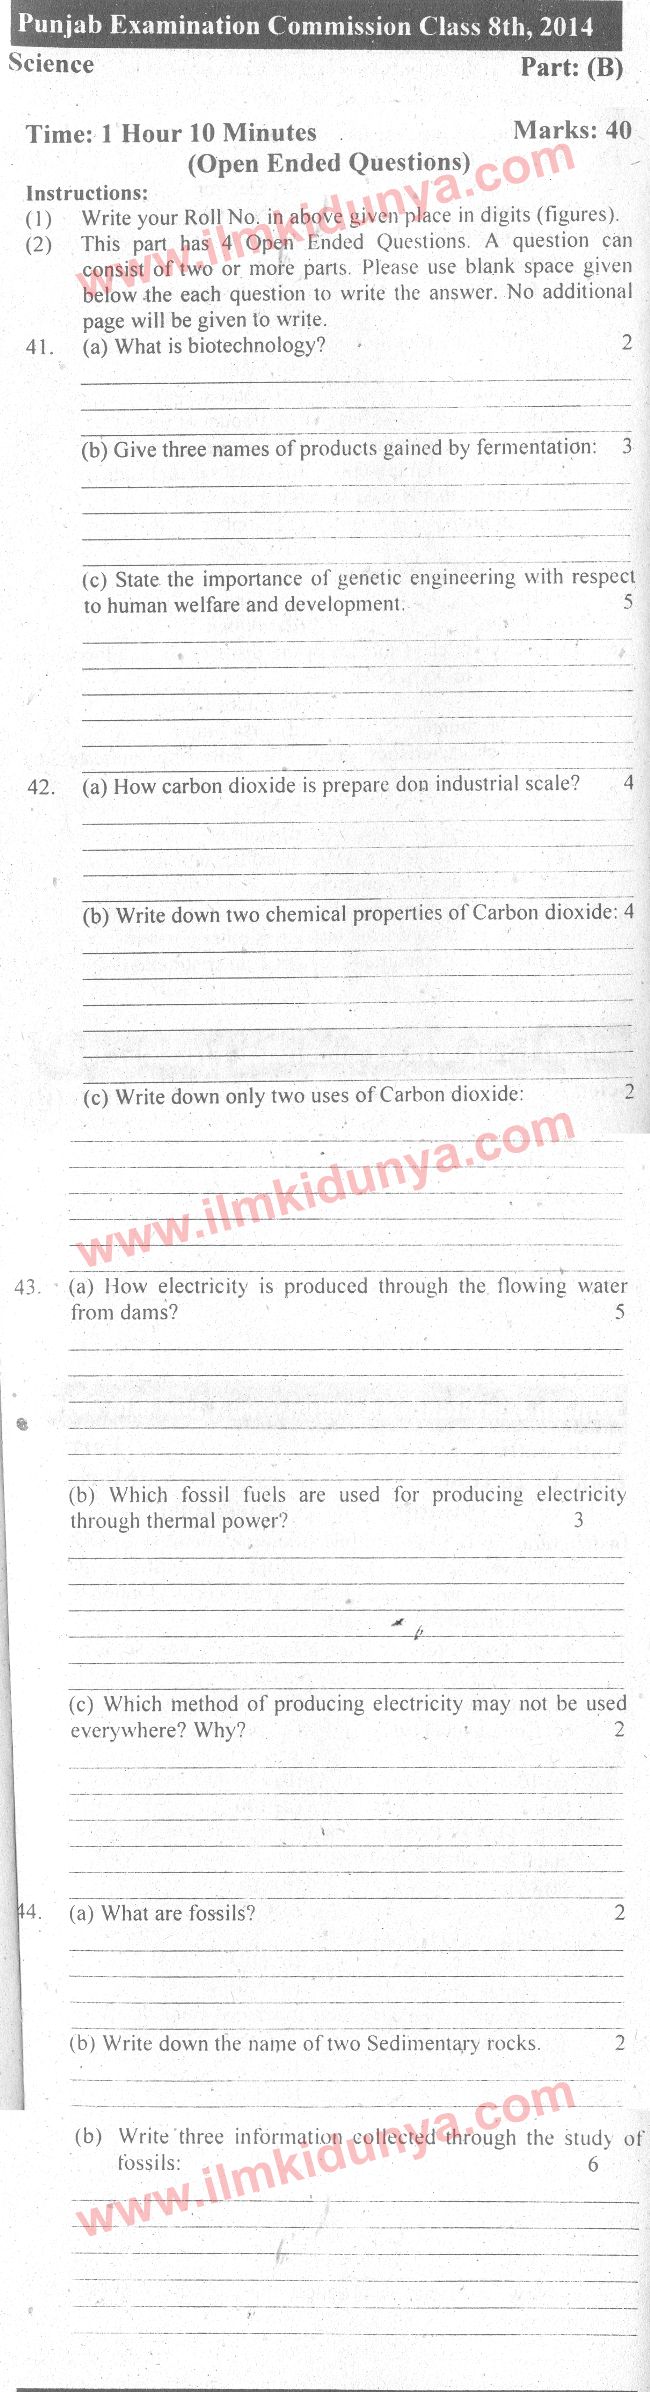 PEC 8th Class Past Paper 2014 Science Subjective English Version